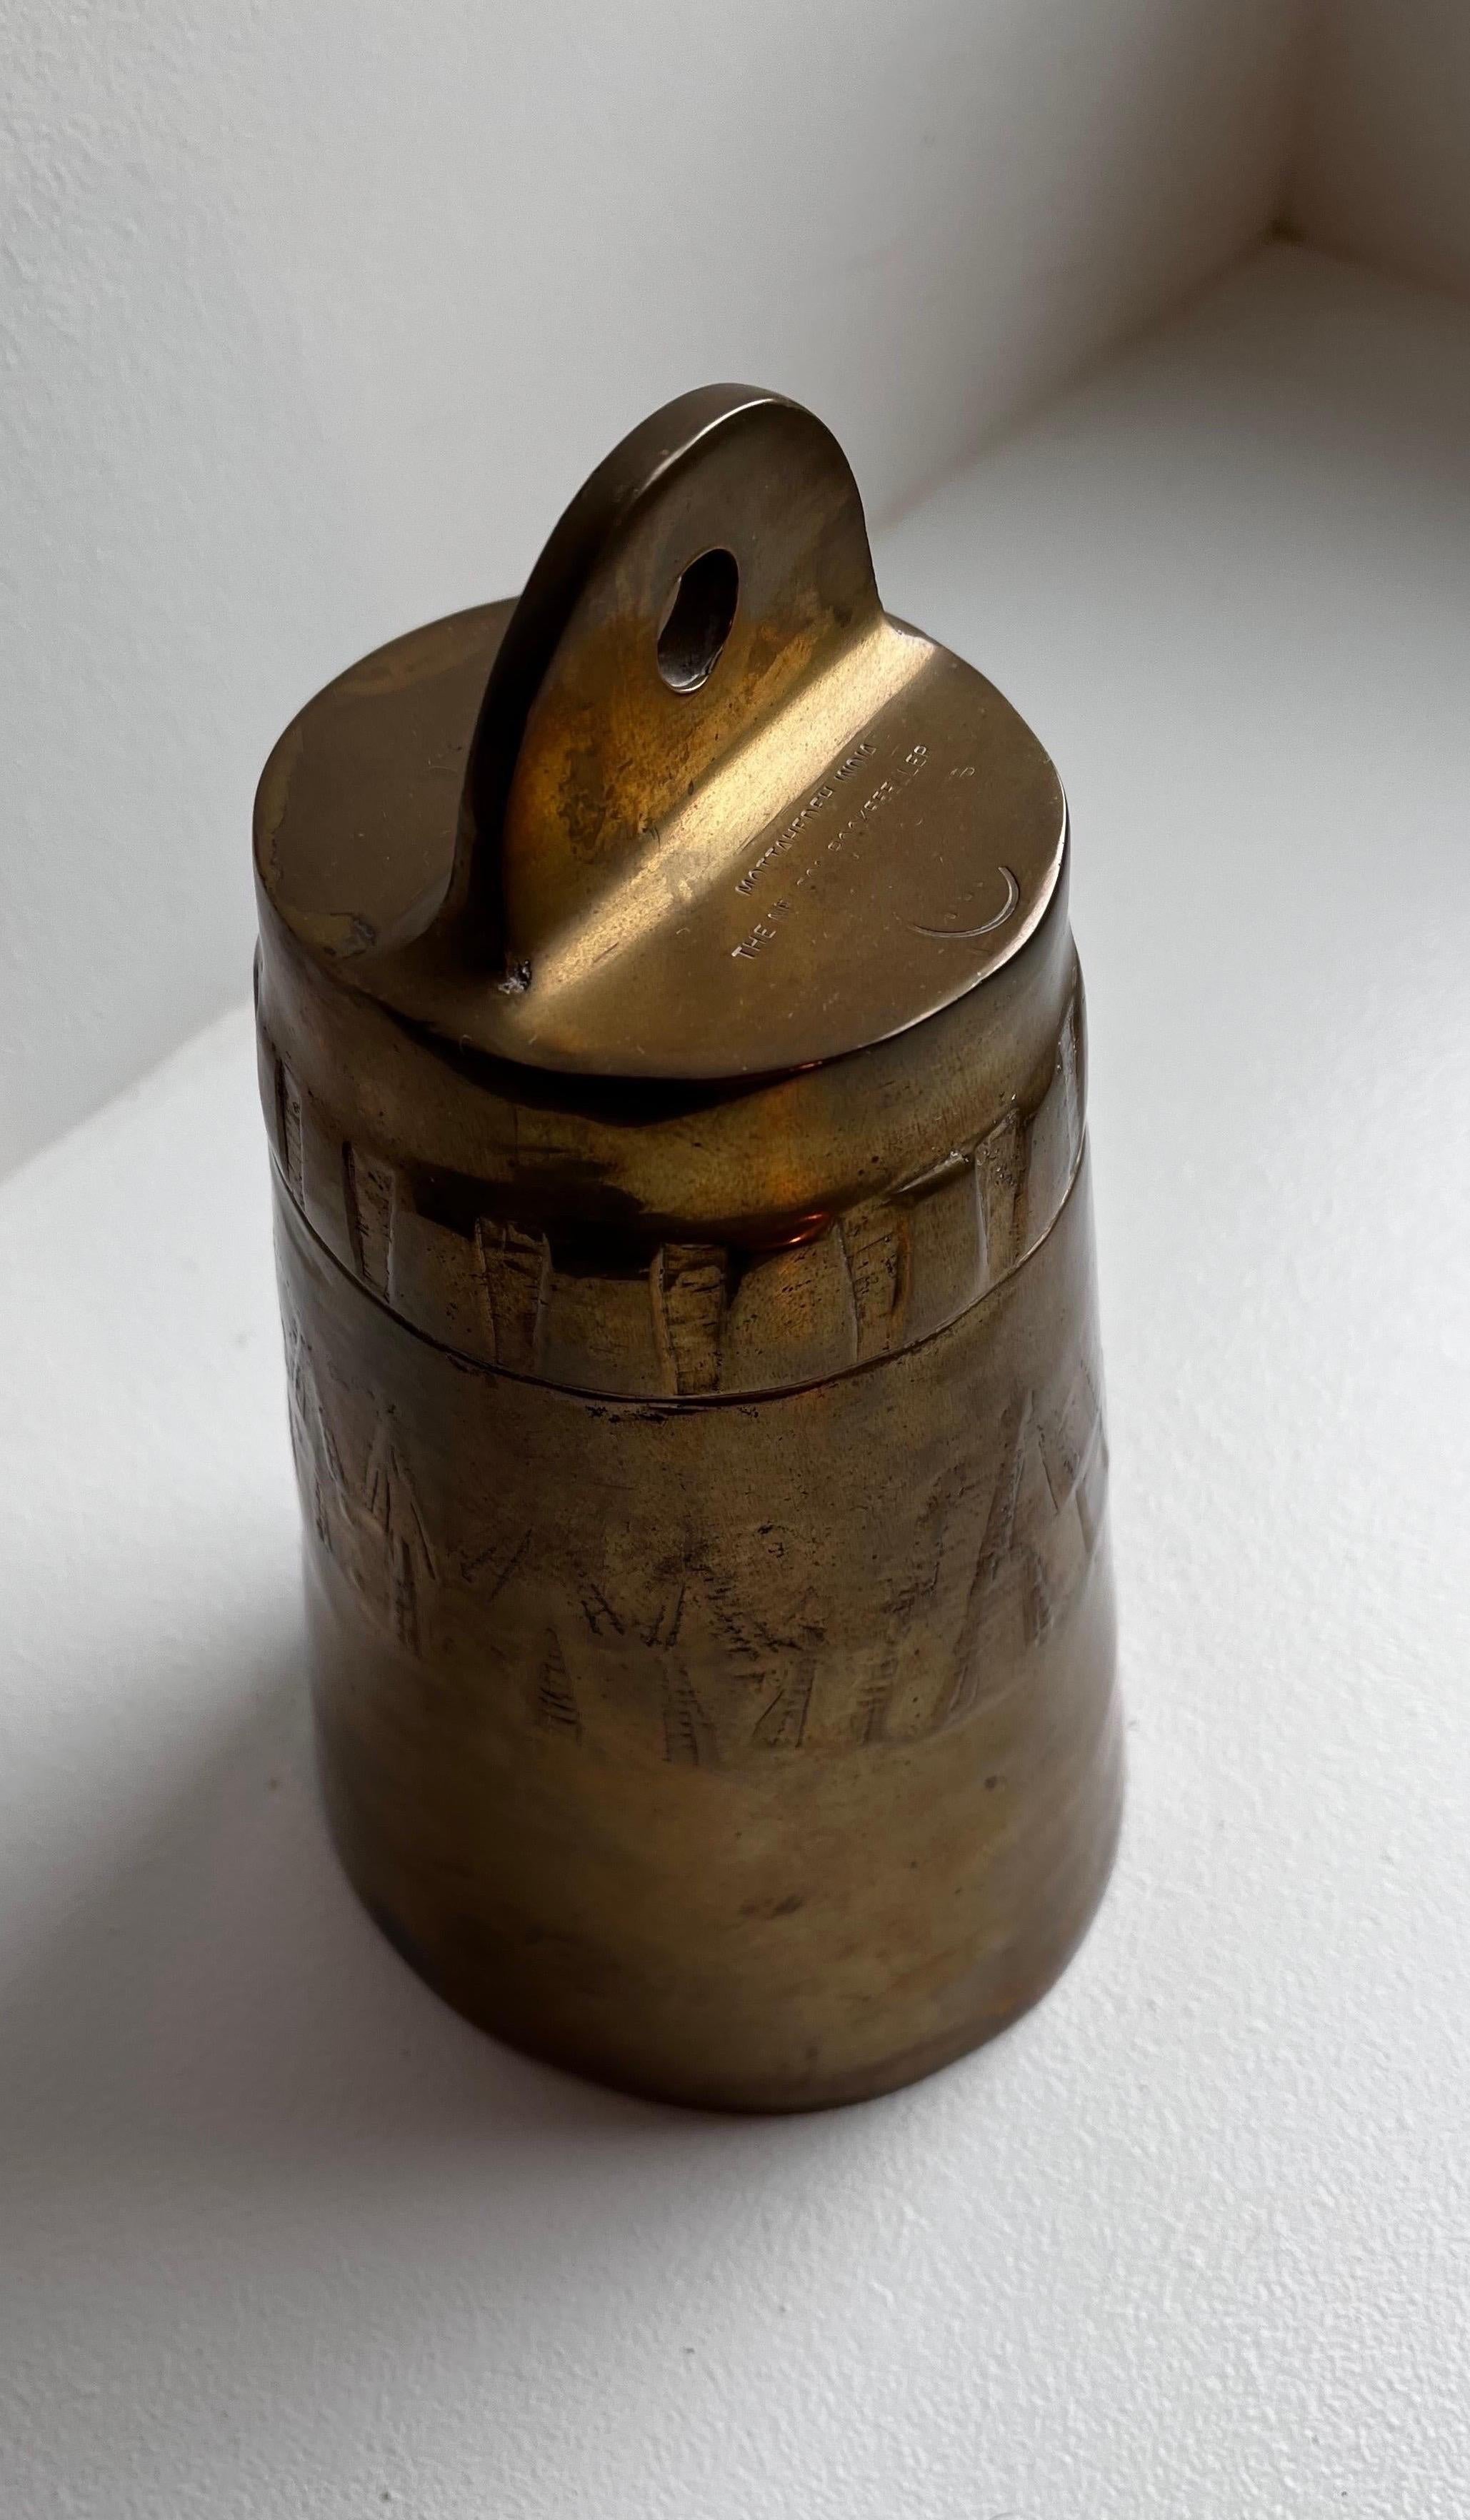 Nelson Rockefeller Collection reproduction brass bell by Mottahedeh
Very unusual bell with three bells in one.
Very heavy for the size.

Partial stamp on top: 